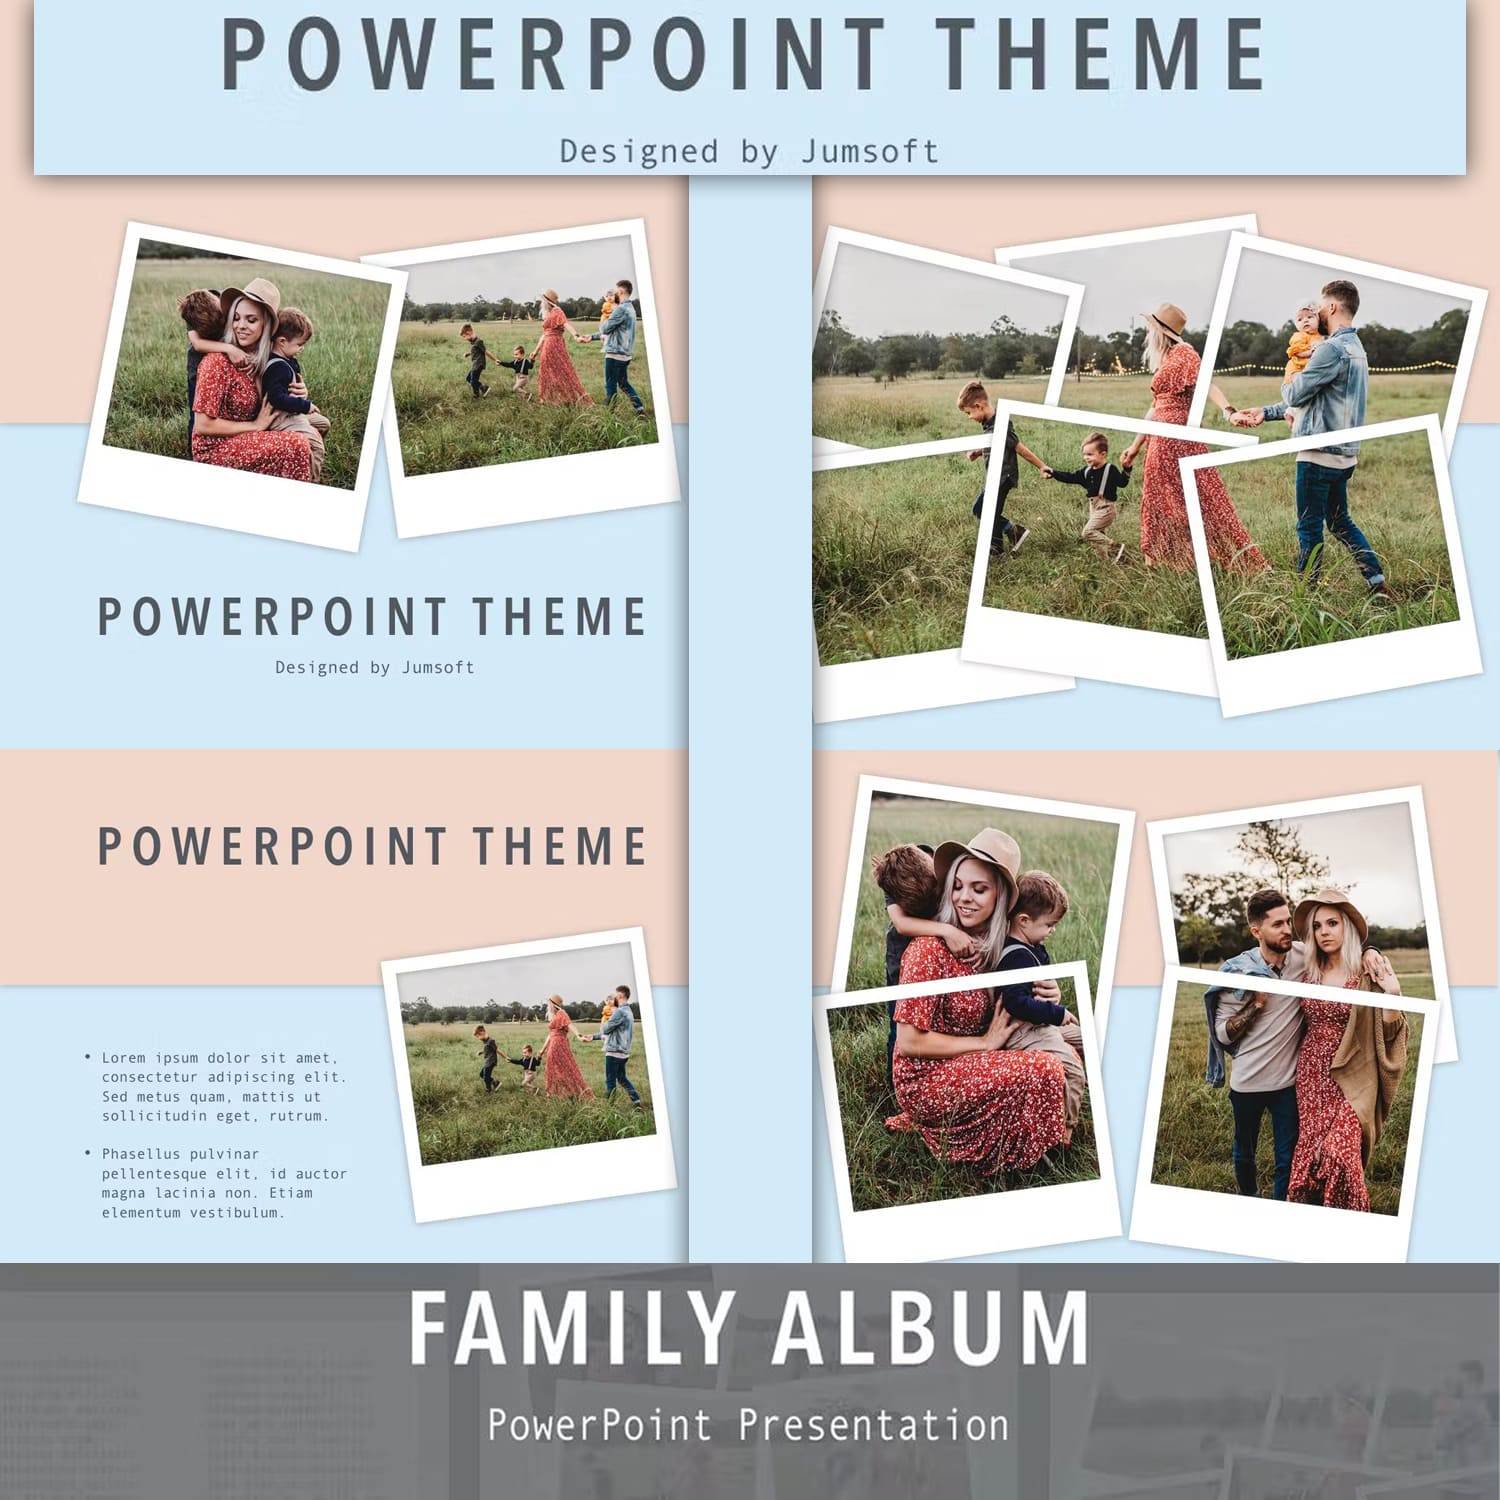 Family album powerpoint template from Jumsoft.